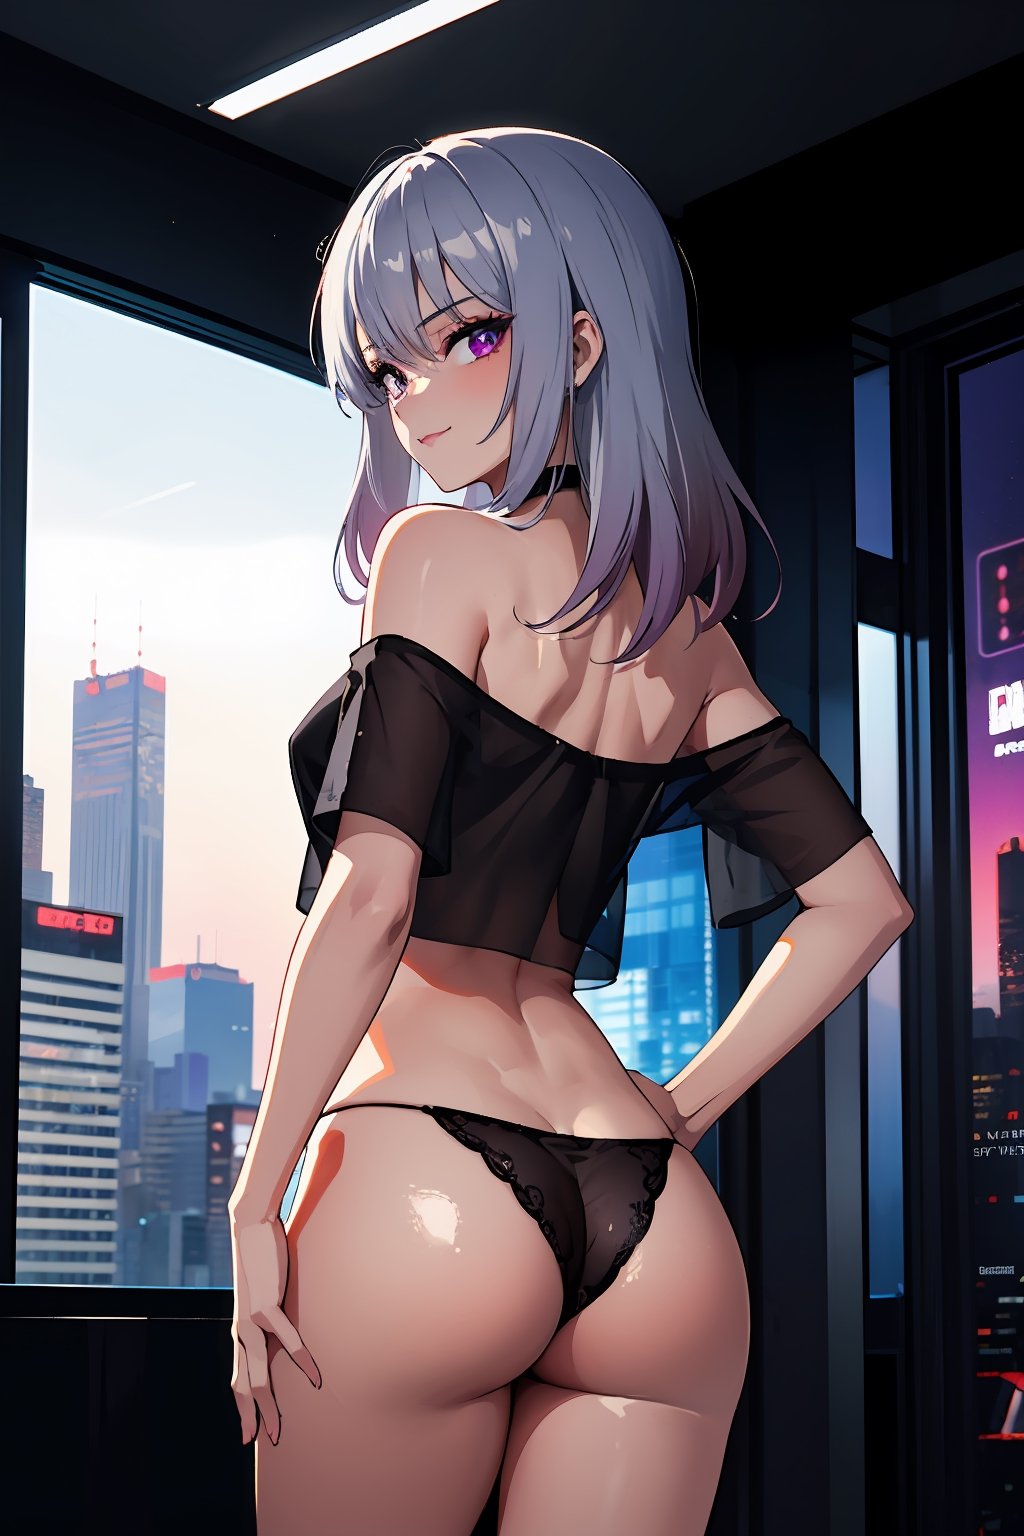 Nsfw, nude, 1girl, solo, tan skin, brown skin, standing, from below, ((from behind)), (sexy pose, dynamic pose), crop top shirt, off-shoulder, see-through shirt, thong panties, naughty smile, (Gradient silver hair, gradient purple hair), purple eyes, expressive eyes, red eyeshadow, red eyeliner, 
cyberpunk setting, cyberpunk bedroom, holographic posters on wall, hologram posters on wall, Large window, cyberpunk cityscape outside window, neon signs, hologram projections,Colorful